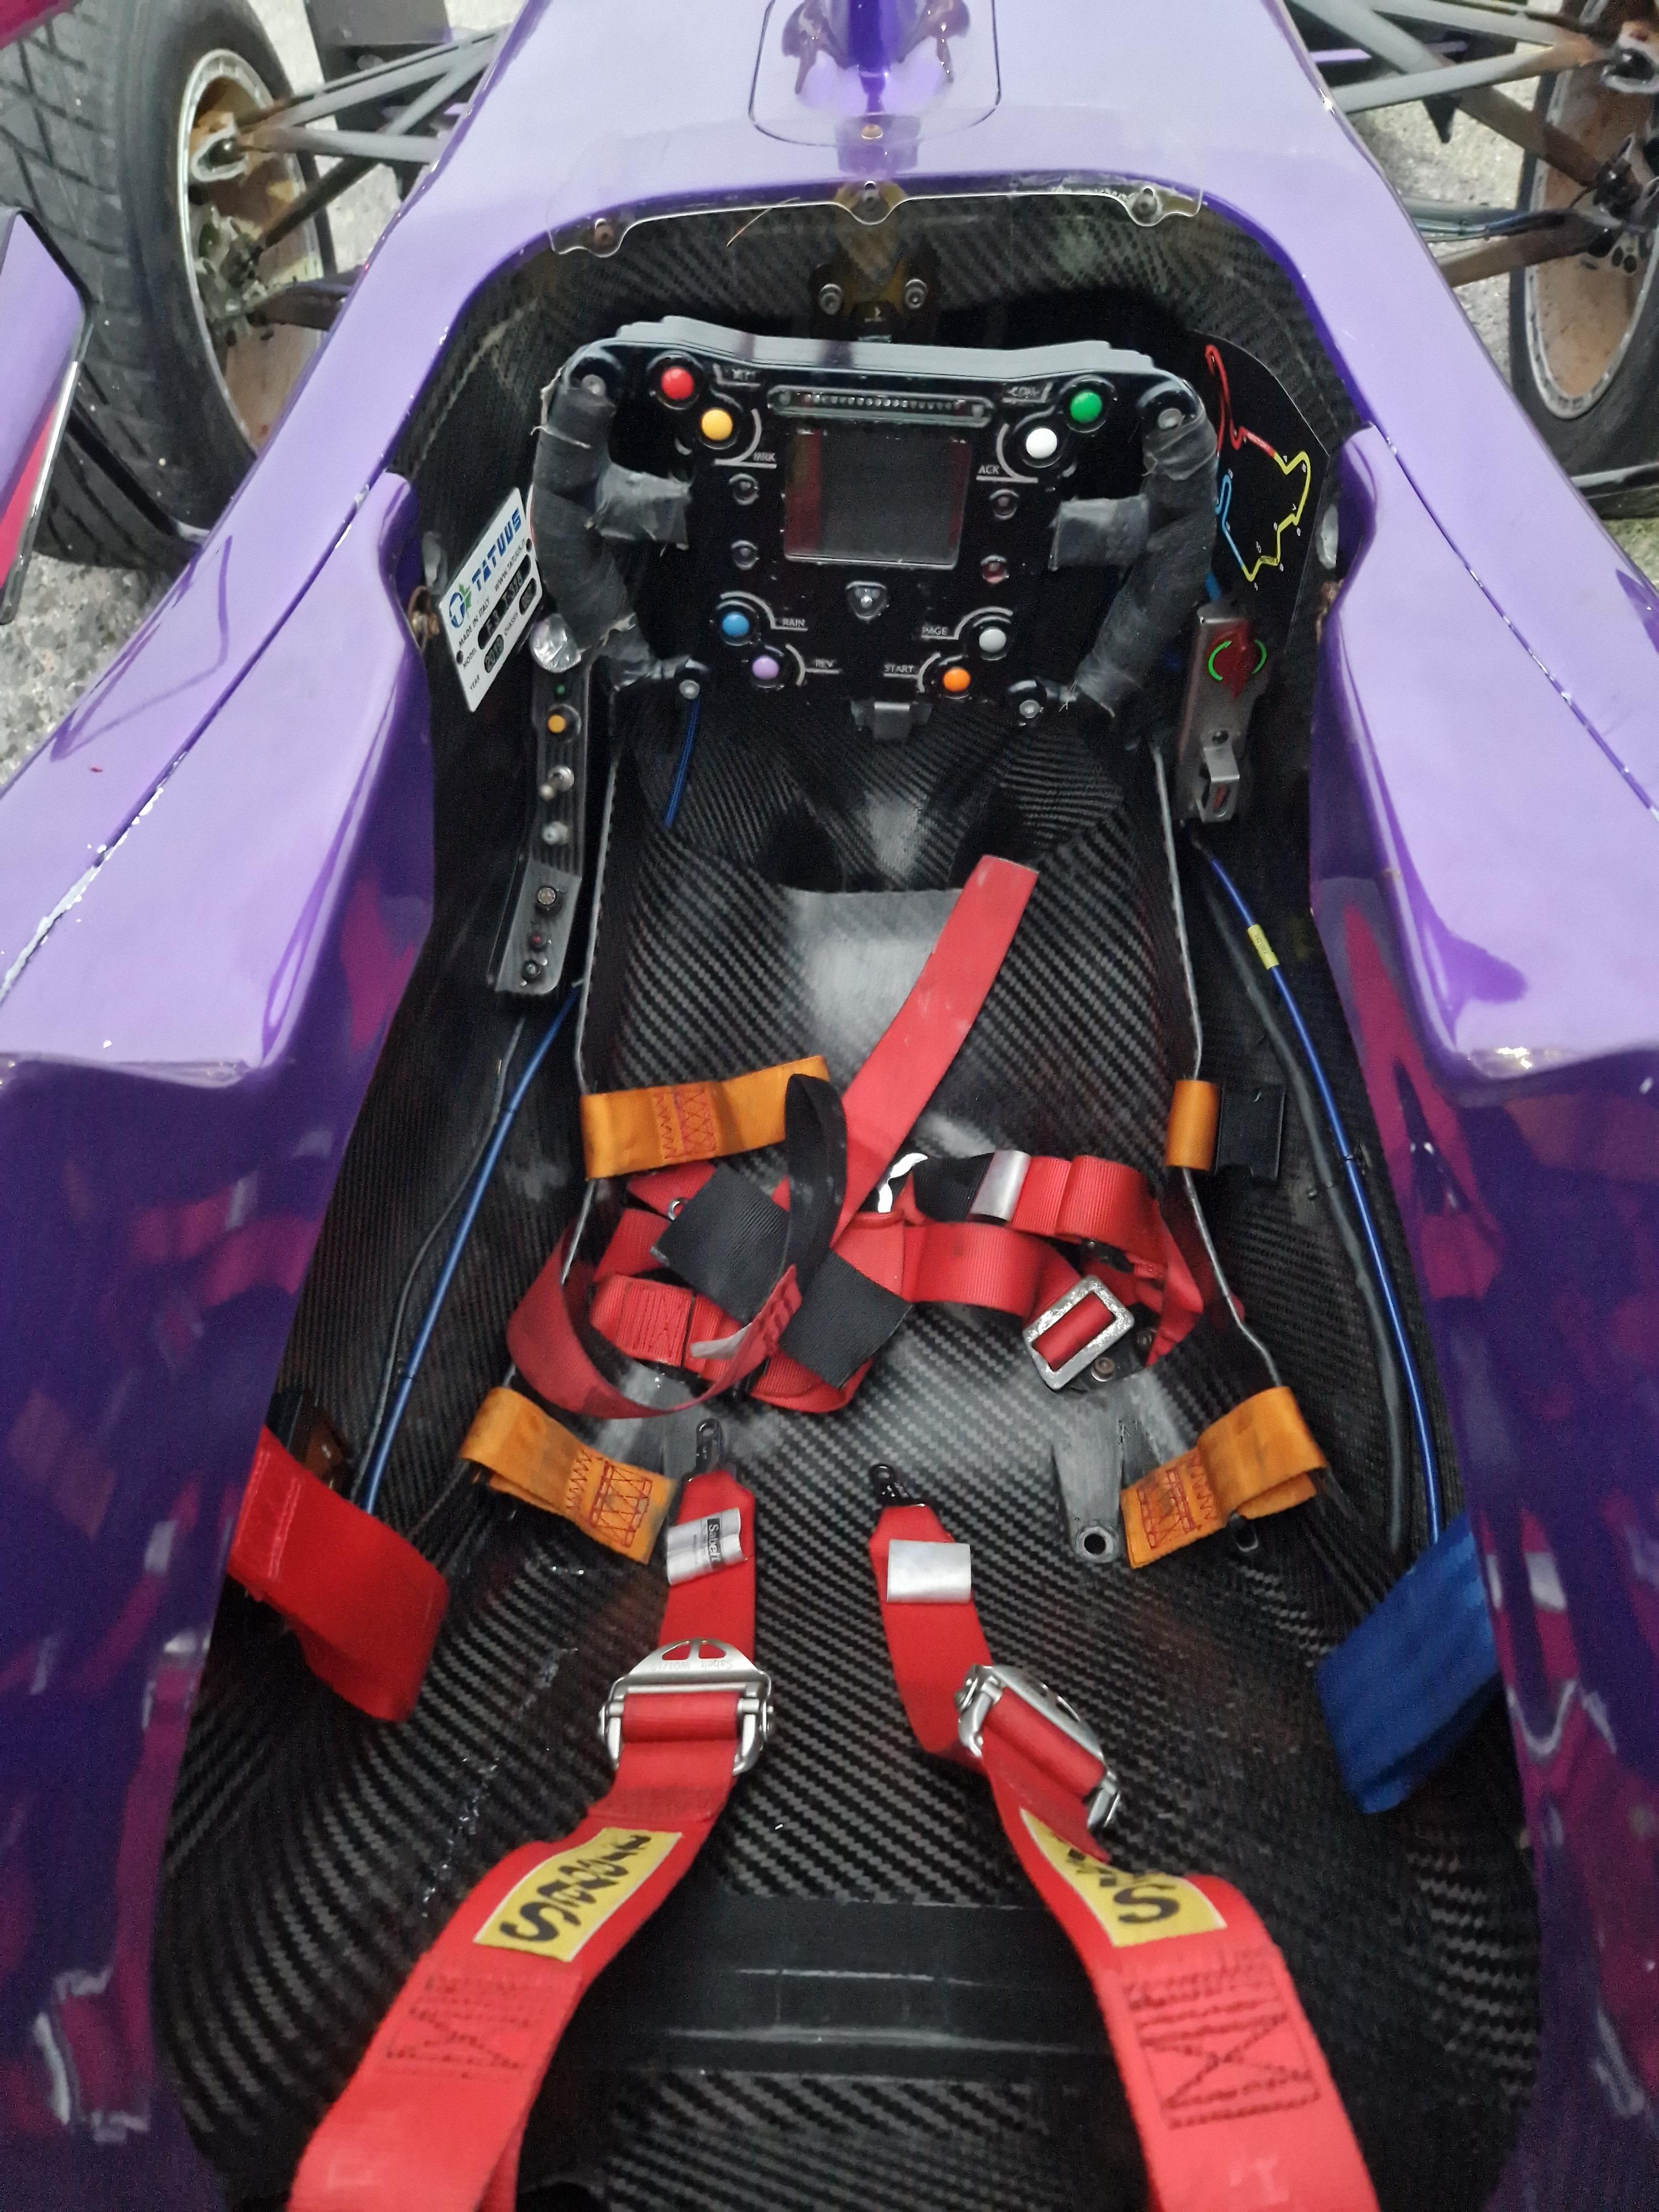 One TATUUS F3 T-318 Alfa Romeo Race Car Chassis No. 057 (2019) Finished in the W Series Academy - Image 5 of 10